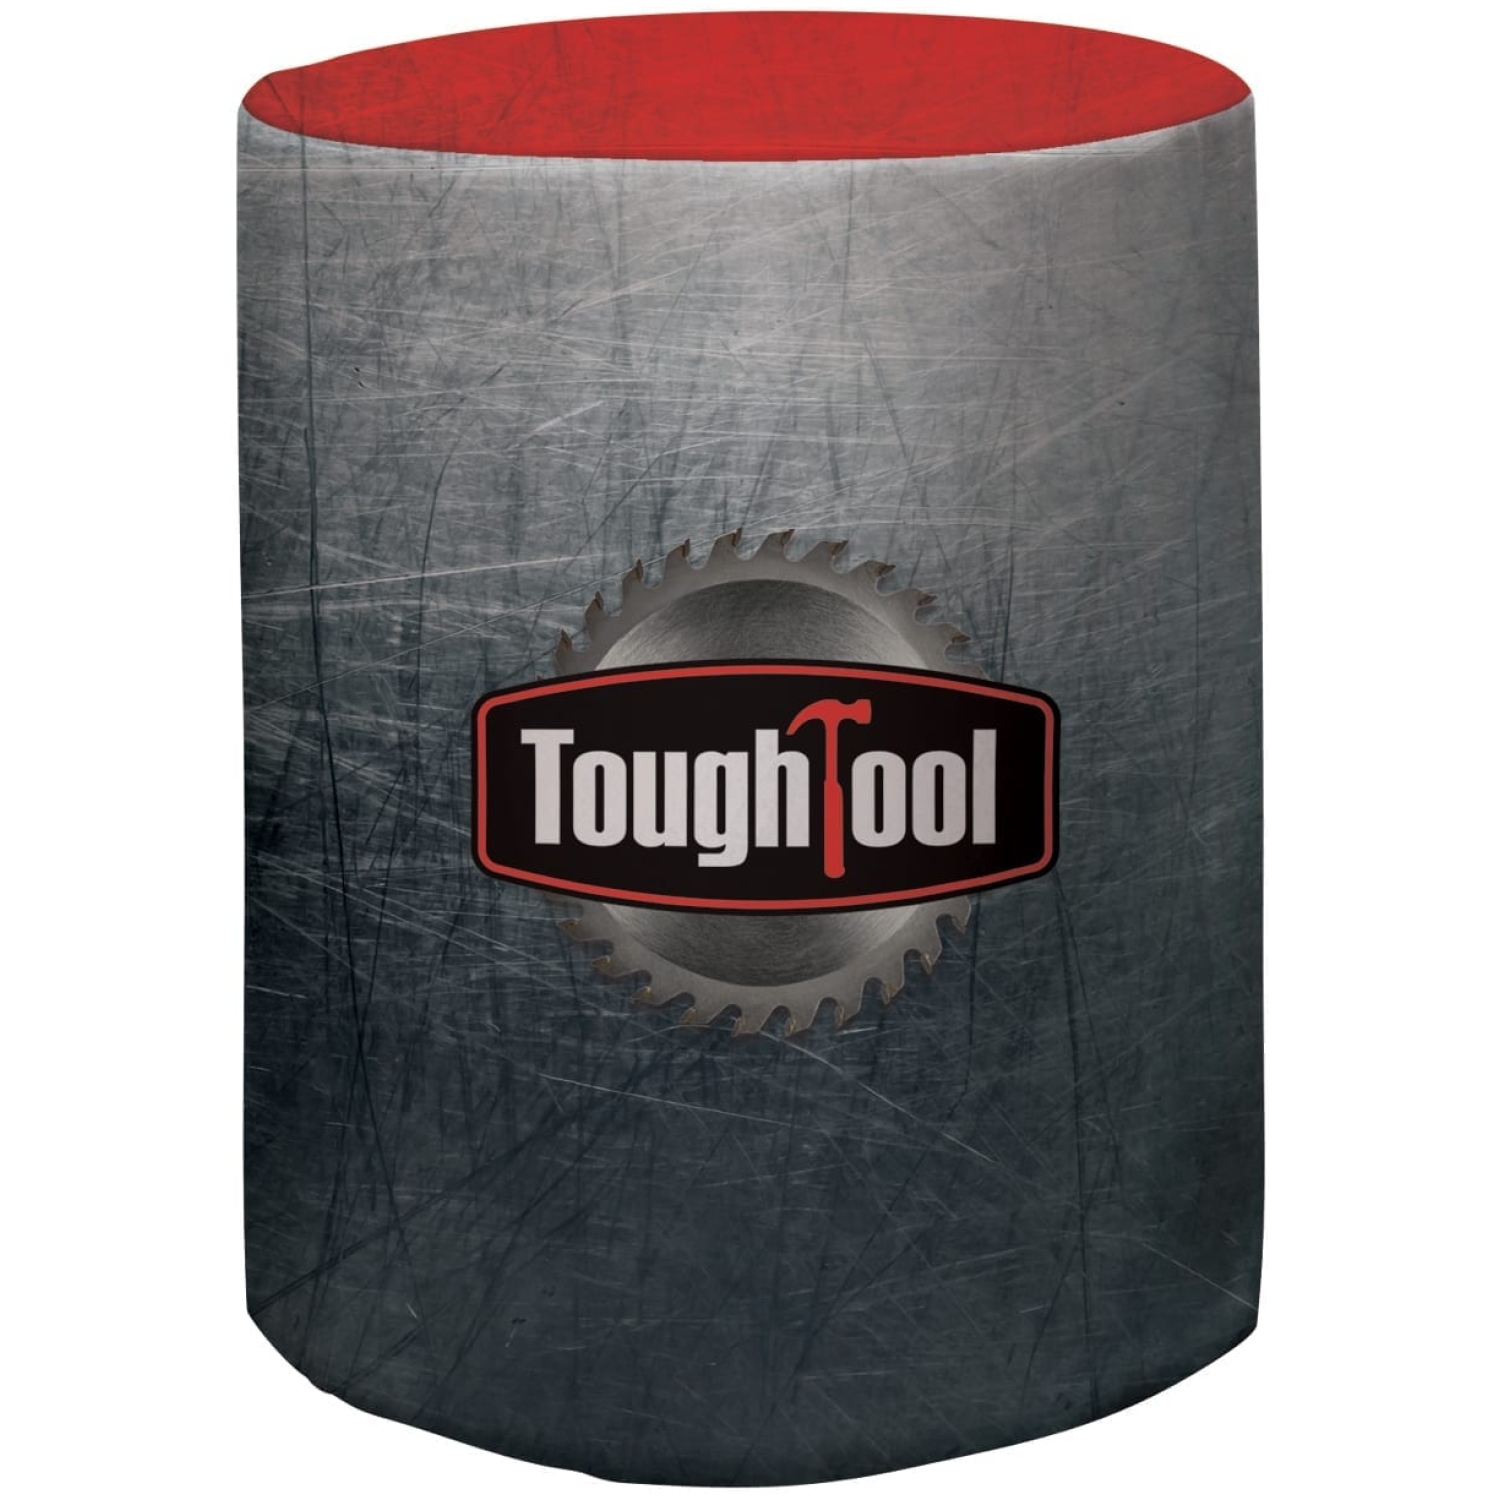 Bar-height Round Fitted Table Throw (dye Sublimation, Full)